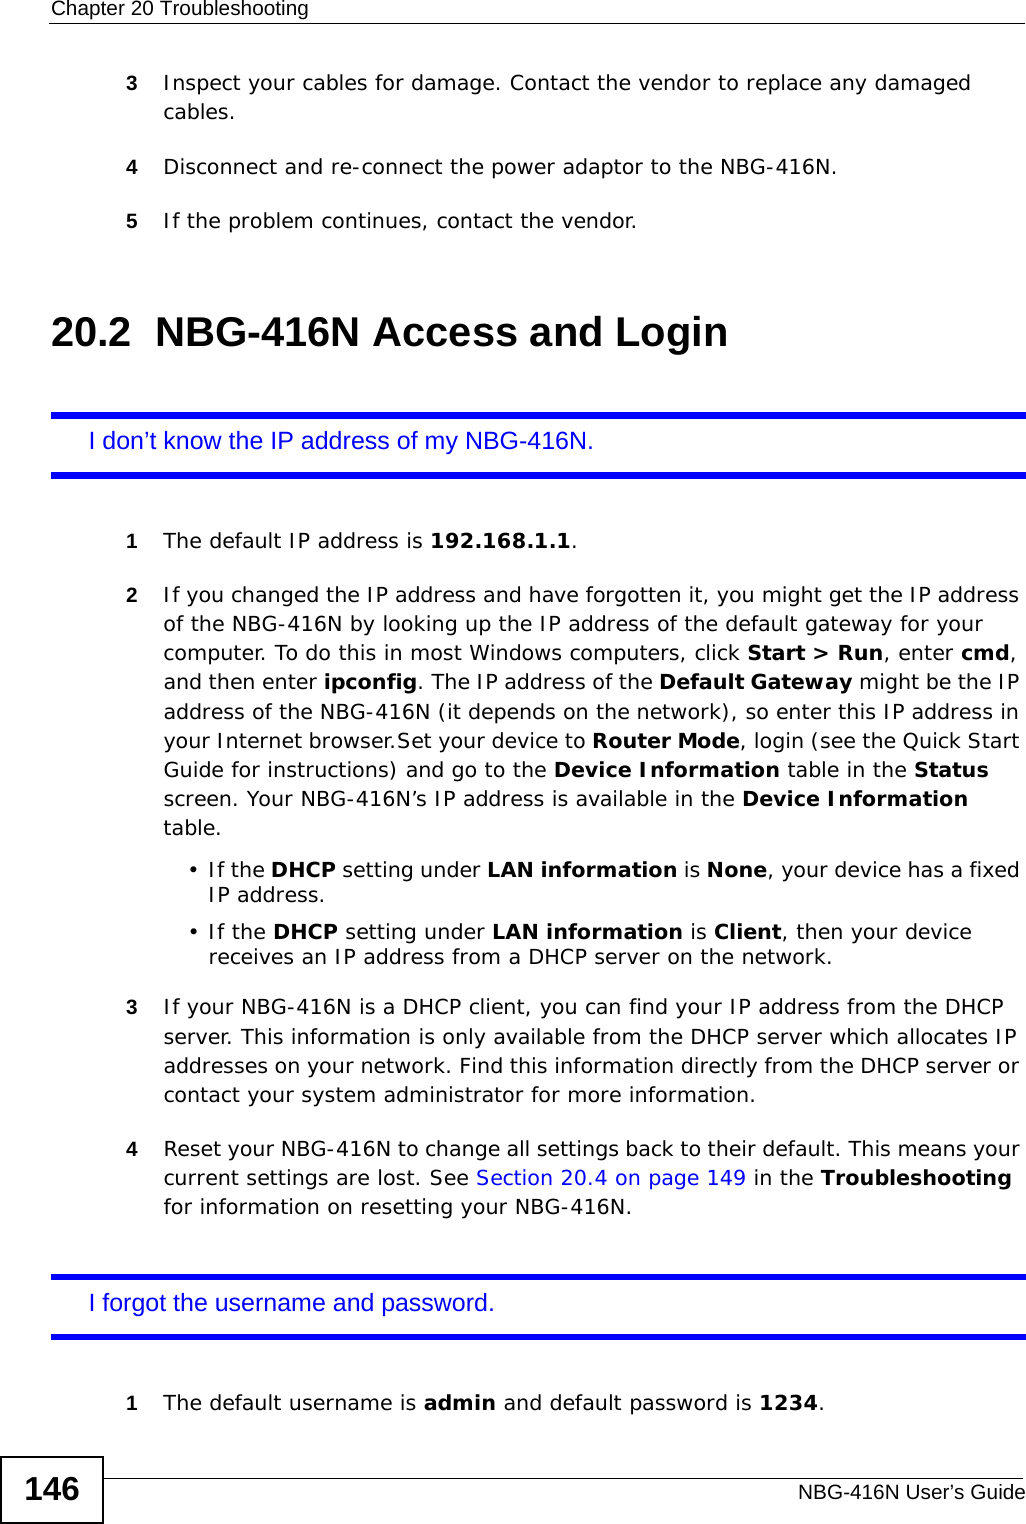 Chapter 20 TroubleshootingNBG-416N User’s Guide1463Inspect your cables for damage. Contact the vendor to replace any damaged cables.4Disconnect and re-connect the power adaptor to the NBG-416N. 5If the problem continues, contact the vendor.20.2  NBG-416N Access and LoginI don’t know the IP address of my NBG-416N.1The default IP address is 192.168.1.1.2If you changed the IP address and have forgotten it, you might get the IP address of the NBG-416N by looking up the IP address of the default gateway for your computer. To do this in most Windows computers, click Start &gt; Run, enter cmd, and then enter ipconfig. The IP address of the Default Gateway might be the IP address of the NBG-416N (it depends on the network), so enter this IP address in your Internet browser.Set your device to Router Mode, login (see the Quick Start Guide for instructions) and go to the Device Information table in the Status screen. Your NBG-416N’s IP address is available in the Device Information table. •If the DHCP setting under LAN information is None, your device has a fixed IP address. •If the DHCP setting under LAN information is Client, then your device receives an IP address from a DHCP server on the network. 3If your NBG-416N is a DHCP client, you can find your IP address from the DHCP server. This information is only available from the DHCP server which allocates IP addresses on your network. Find this information directly from the DHCP server or contact your system administrator for more information.4Reset your NBG-416N to change all settings back to their default. This means your current settings are lost. See Section 20.4 on page 149 in the Troubleshooting for information on resetting your NBG-416N. I forgot the username and password.1The default username is admin and default password is 1234.